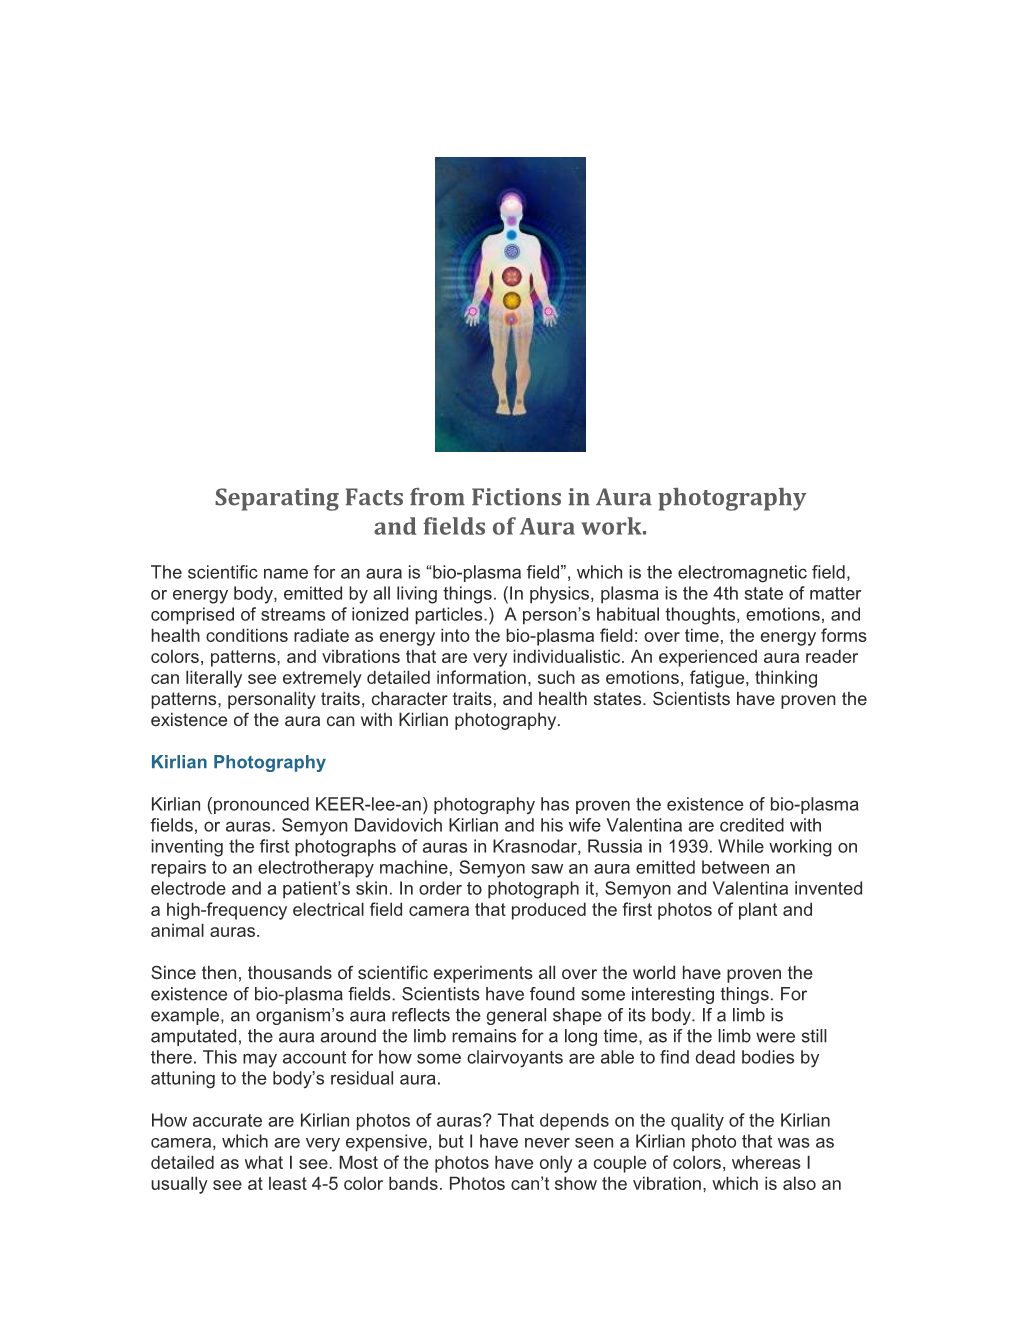 Separating Facts from Fictions in Aura Photography and Fields of Aura Work